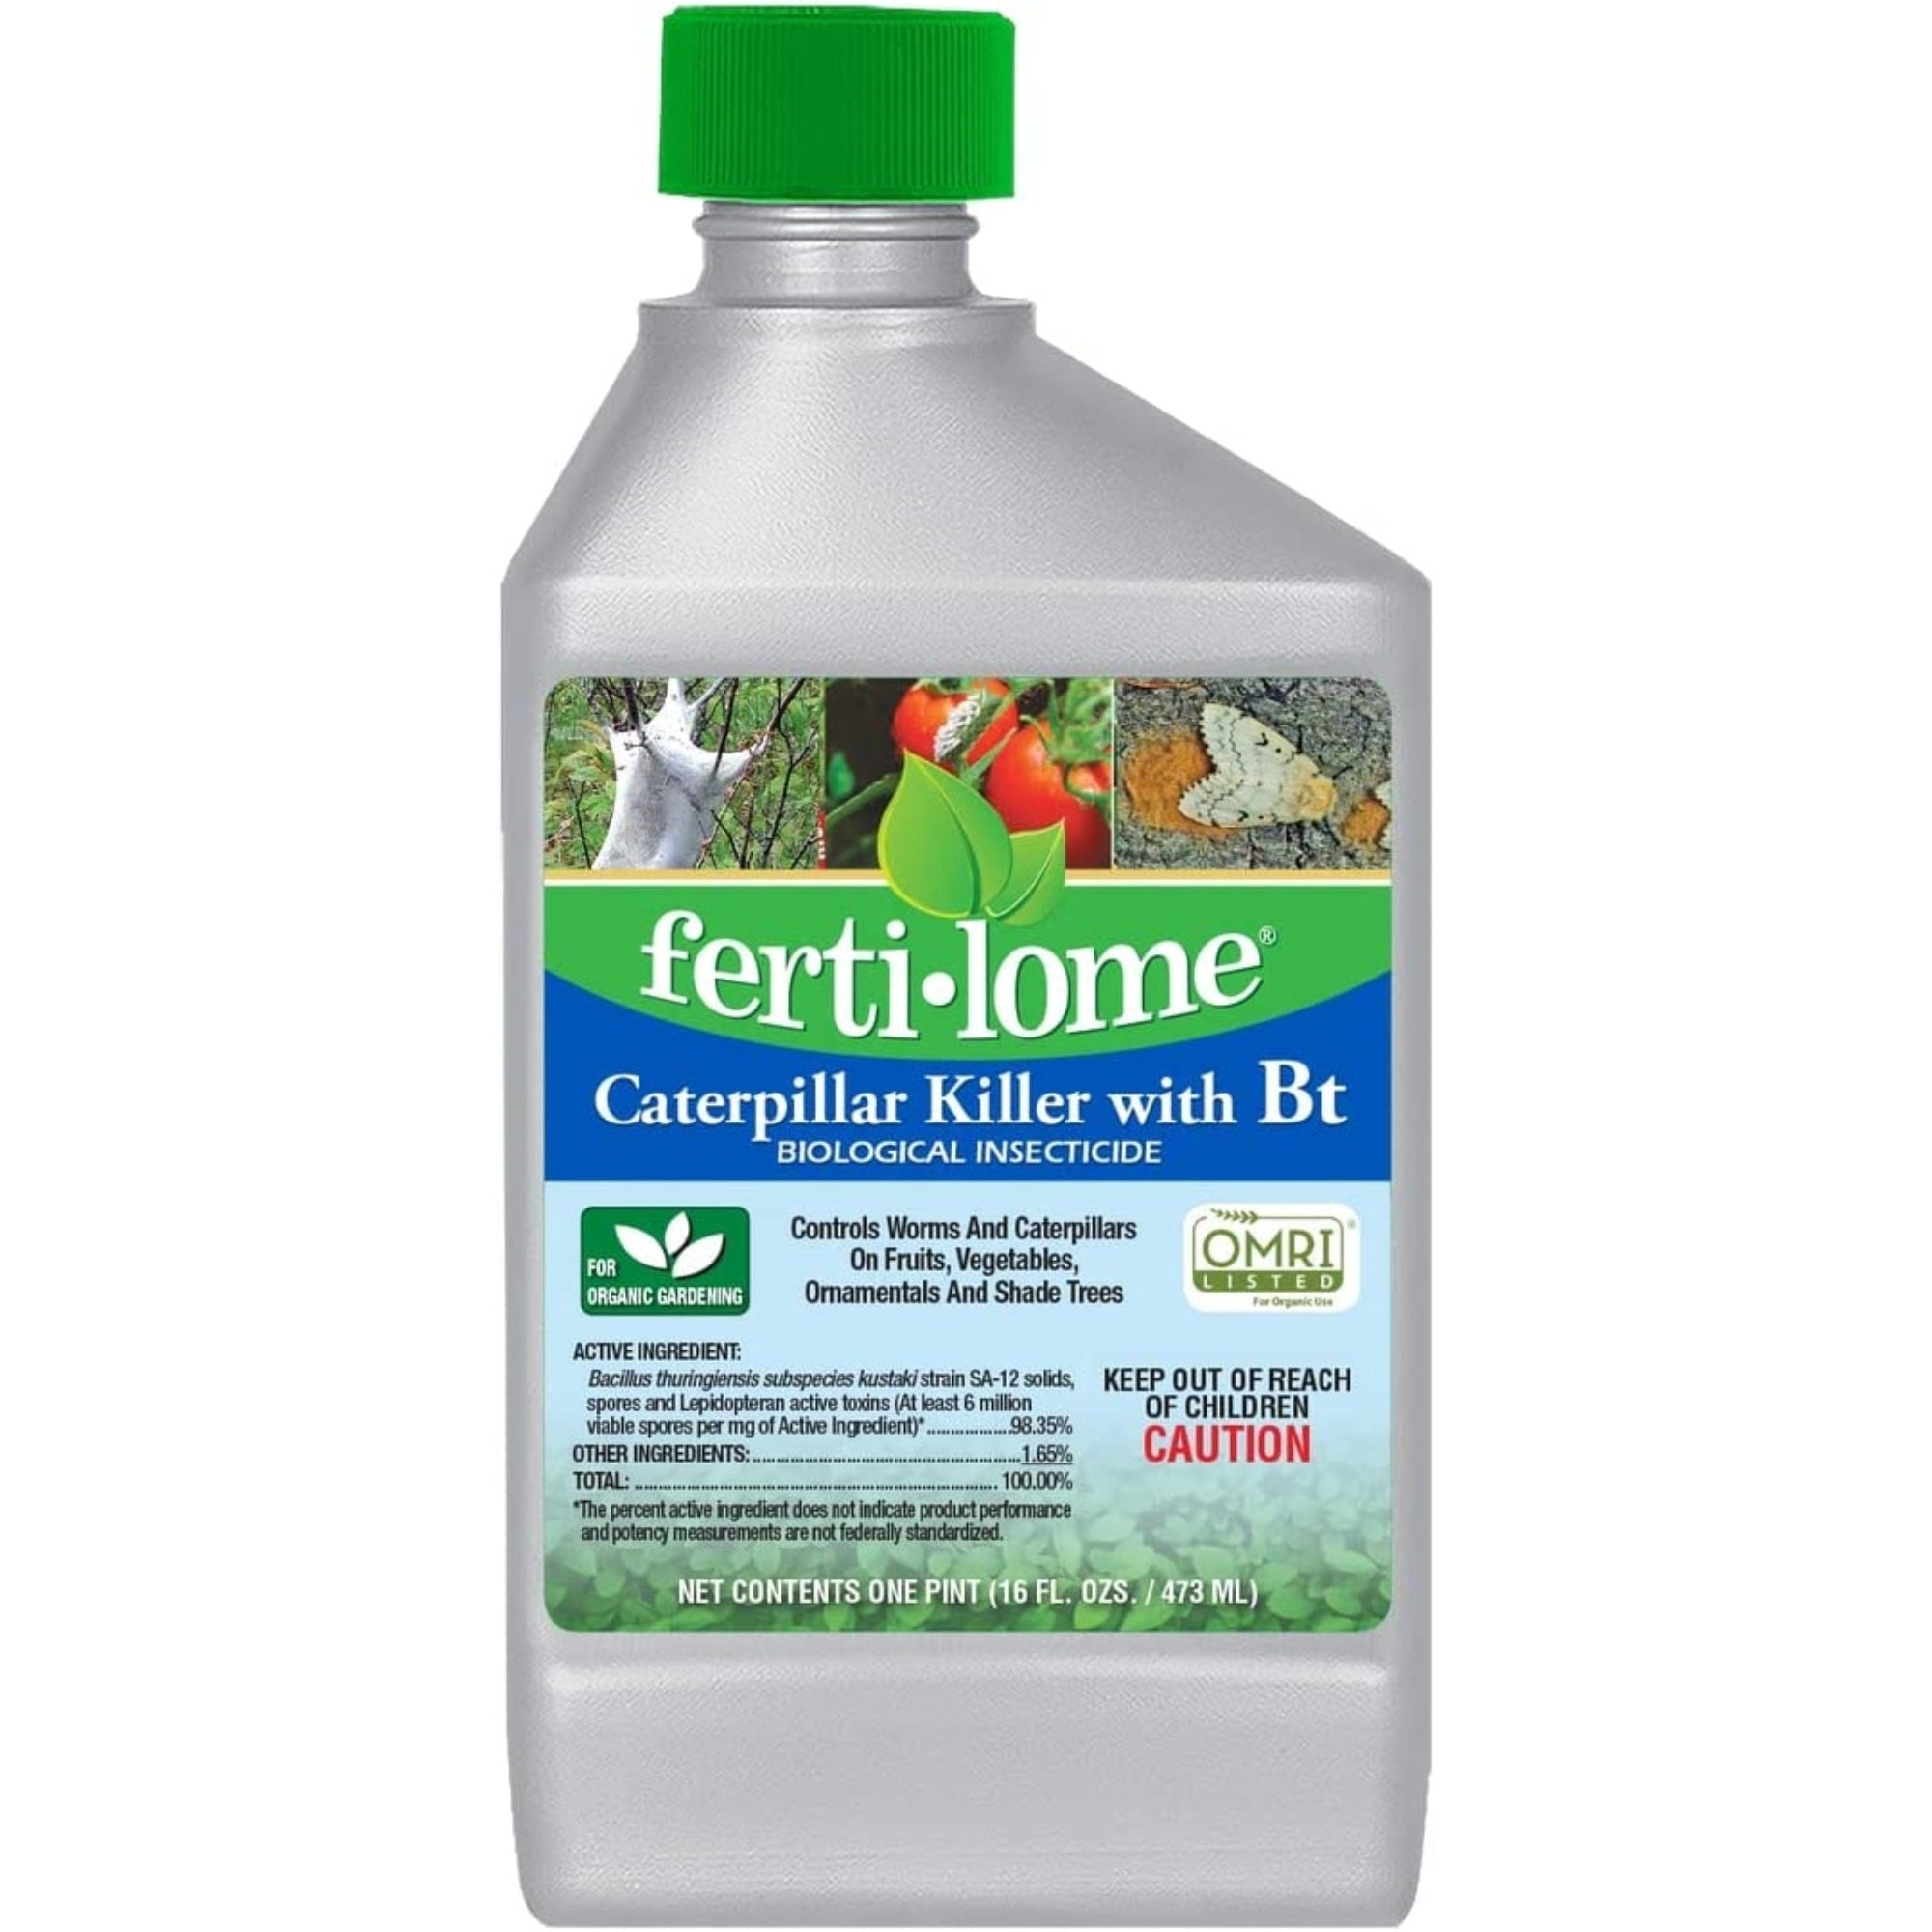 Fertilome Caterpillar Killer with Bt Biological Insecticide, OMRI Listed (16 oz.)